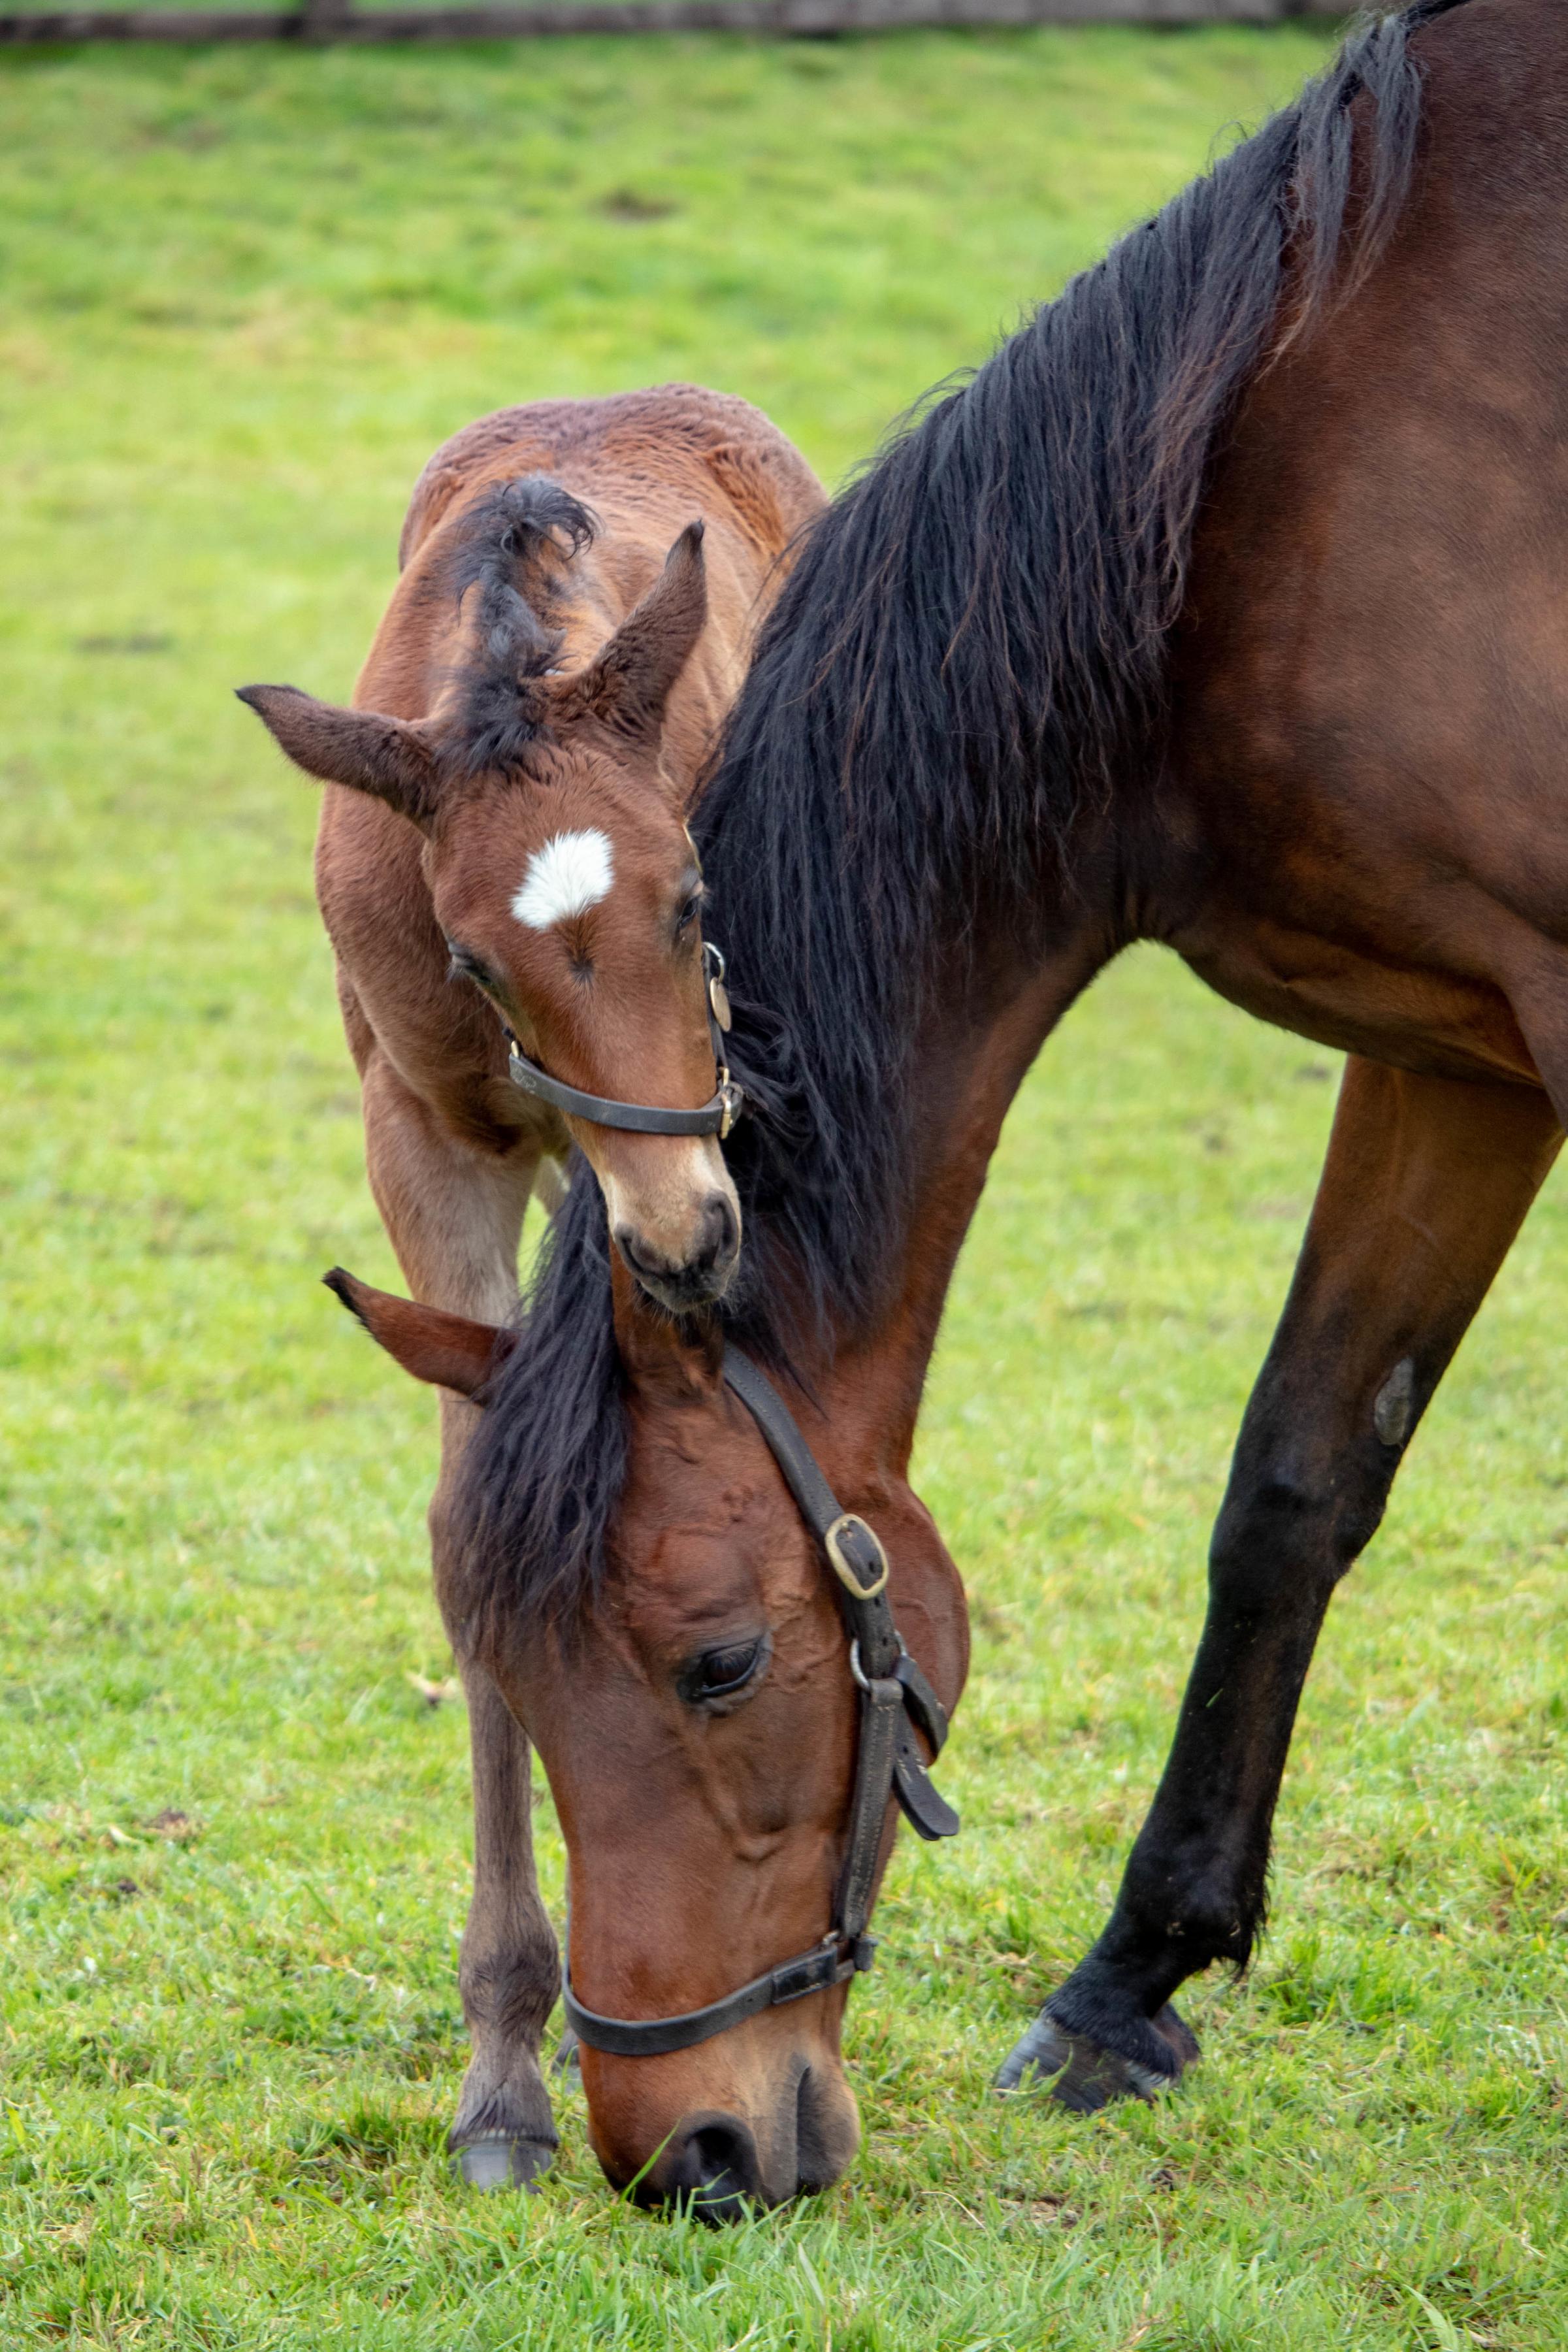 2. Another of the mares and her foal at Elwick Stud